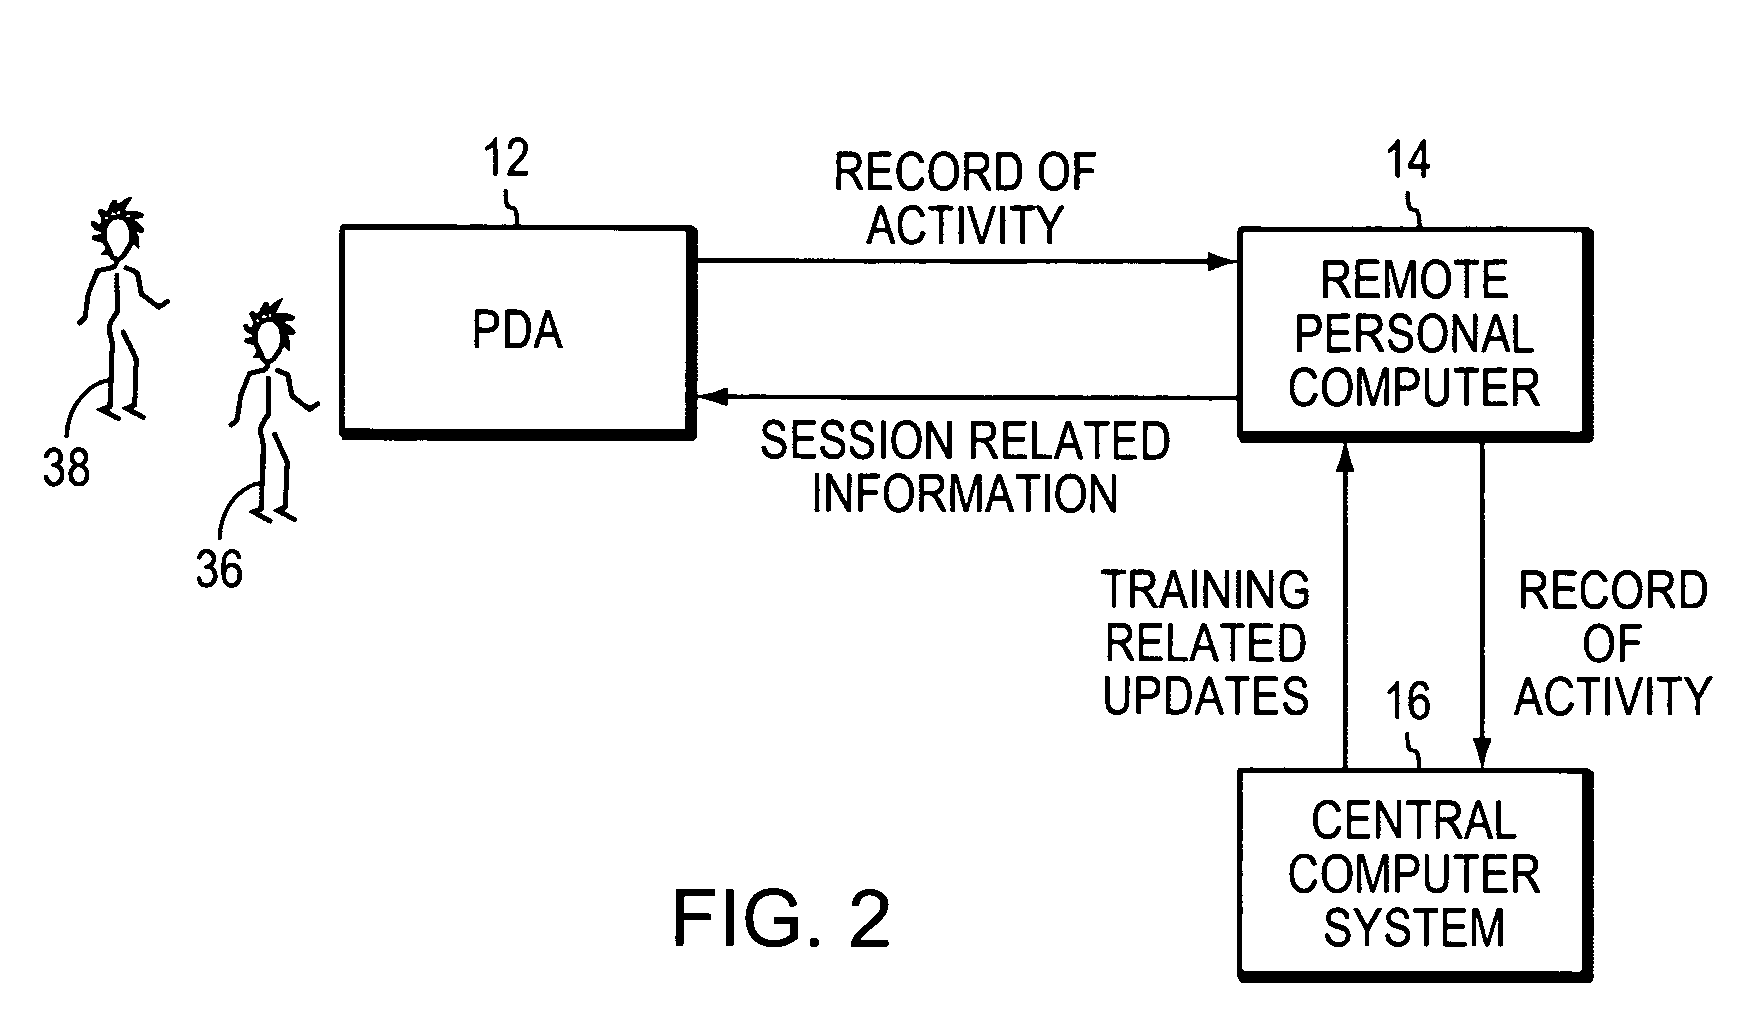 Computer system for monitoring actual performance to standards in real time